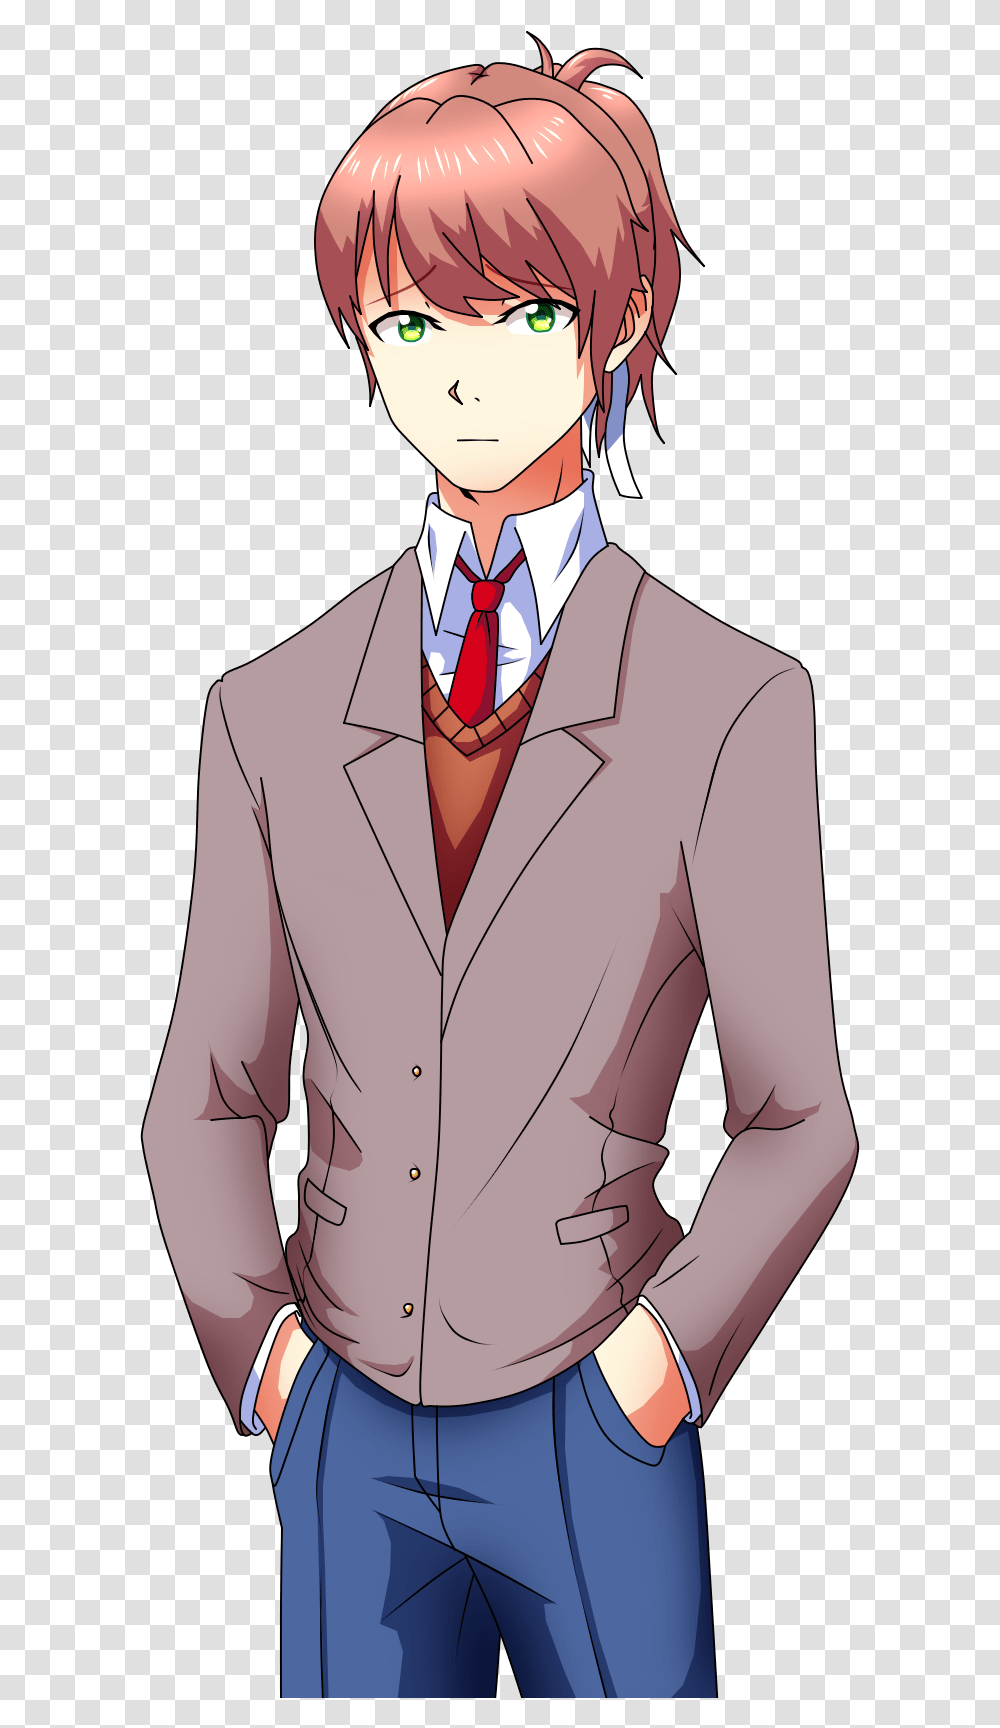 Sorry About That They Usually Are Not Like This Tuxedo, Apparel, Suit, Overcoat Transparent Png